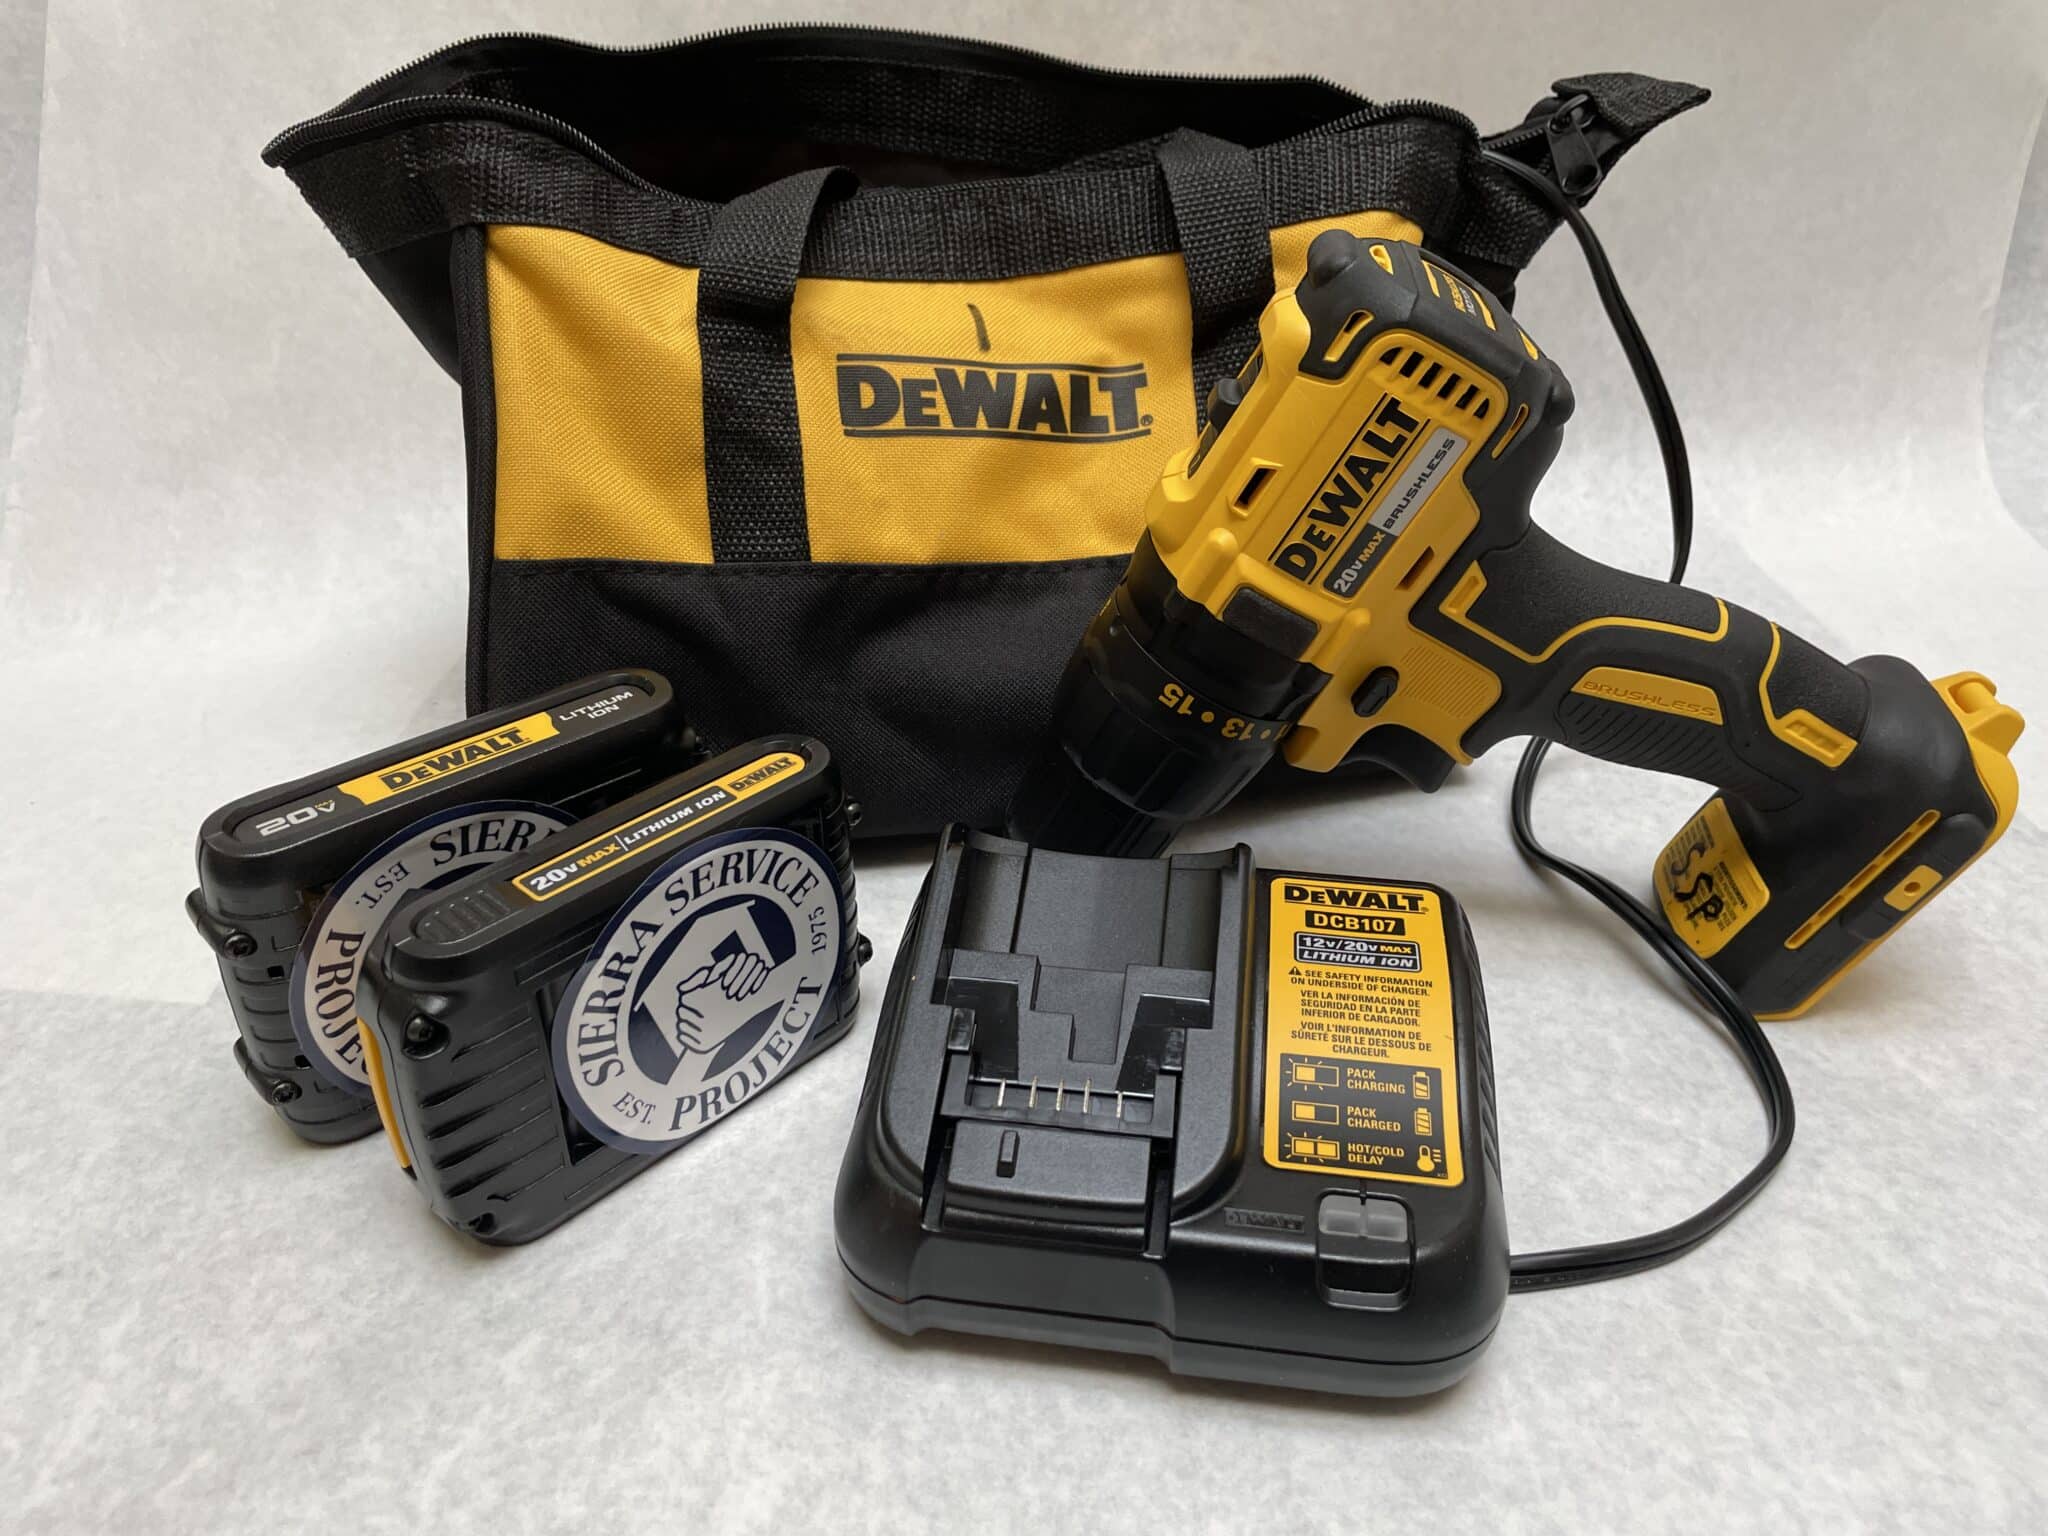 Tool library item: DeWalt cordless drill with battery packs.